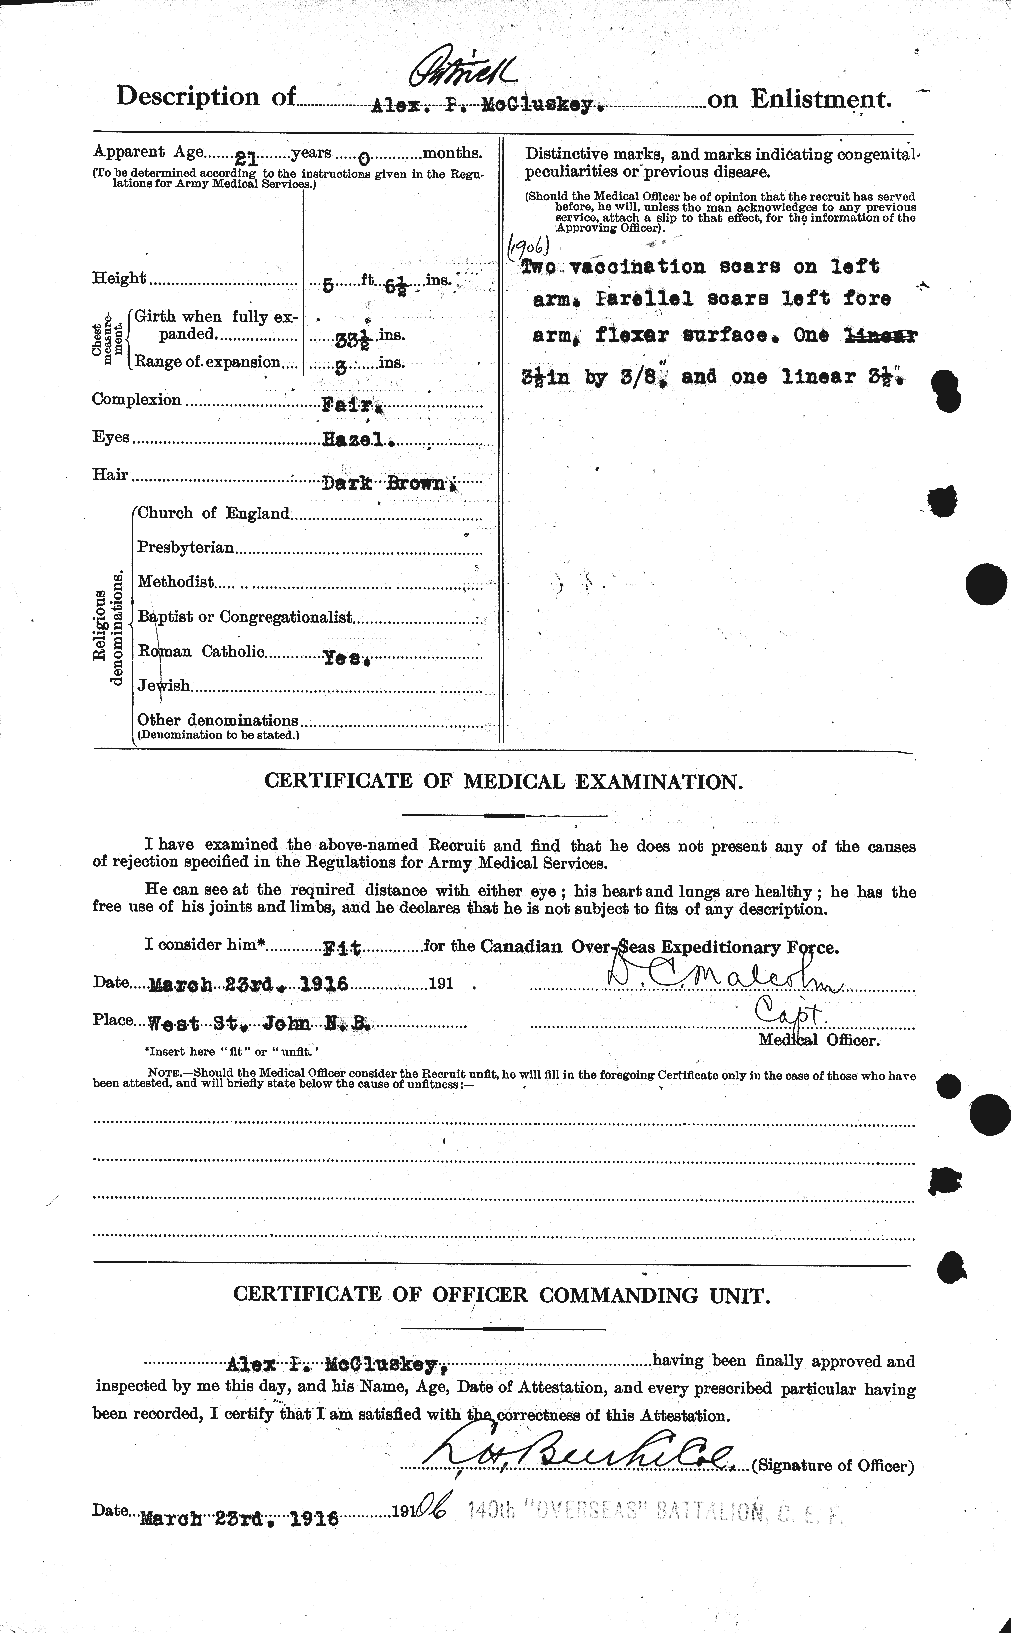 Personnel Records of the First World War - CEF 133475b